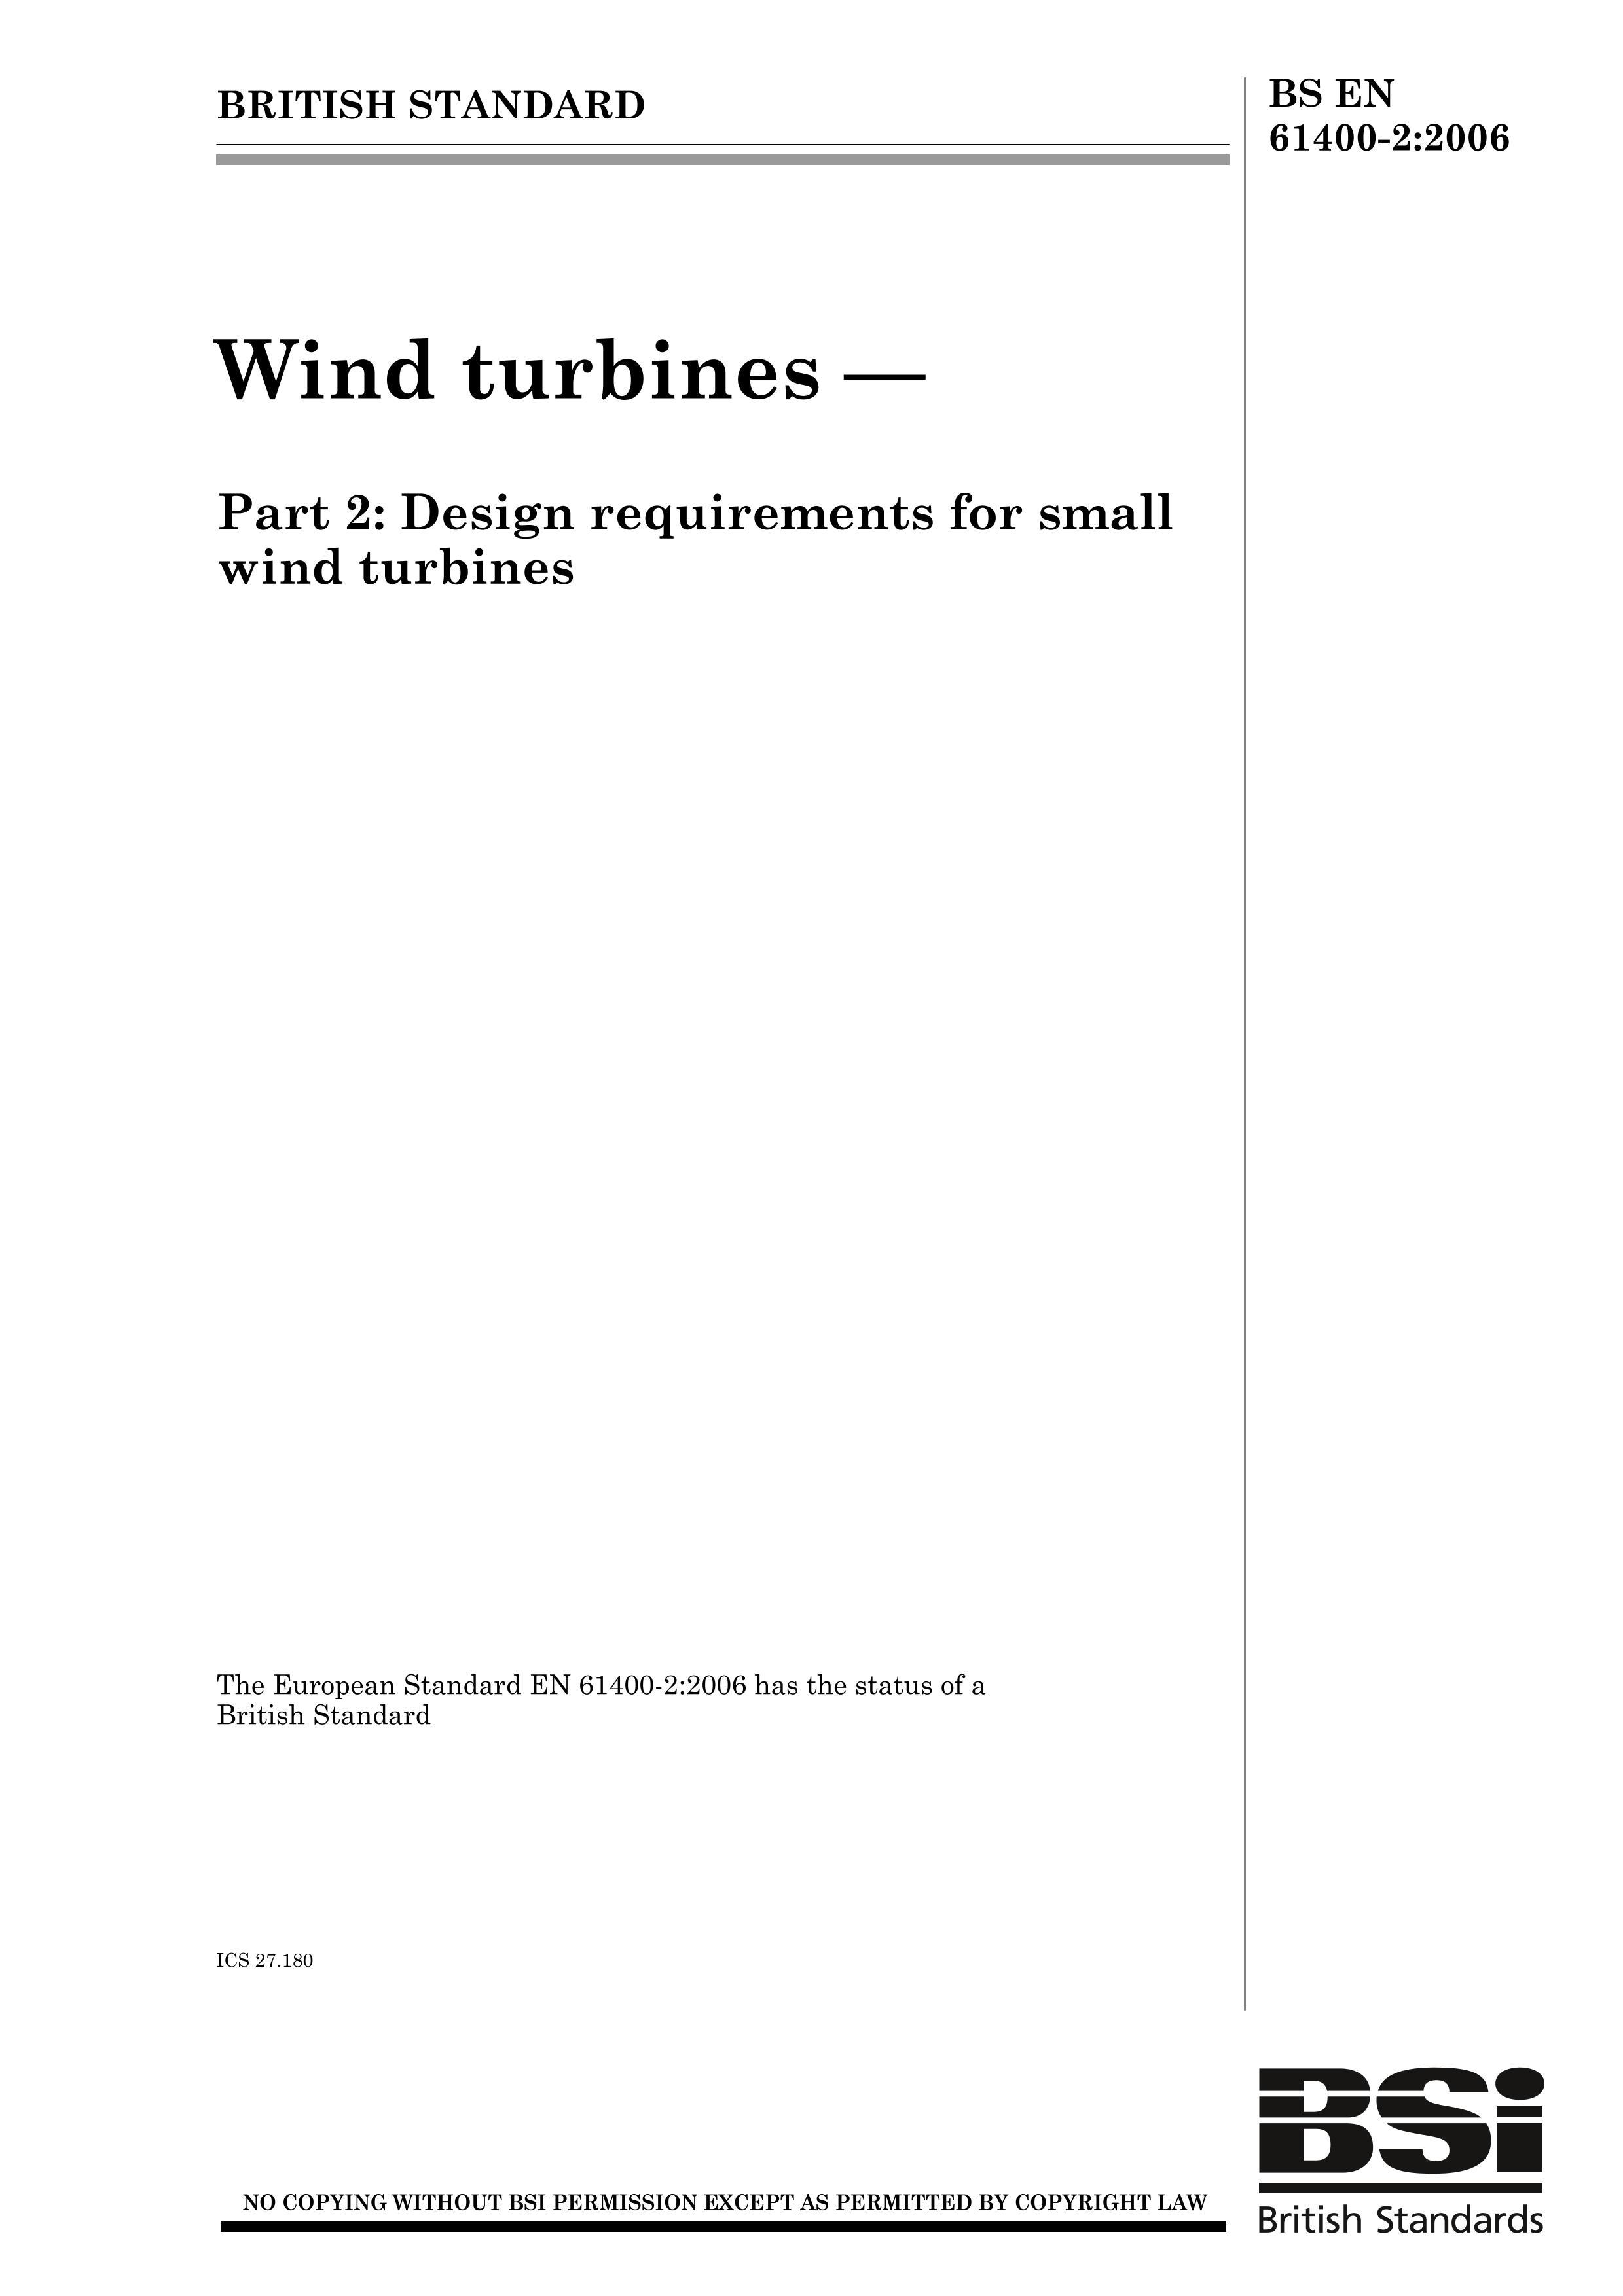 BS EN 61400-2-2006 Wind turbines Part 2- Design requirements for small wind turbines.pdf1ҳ